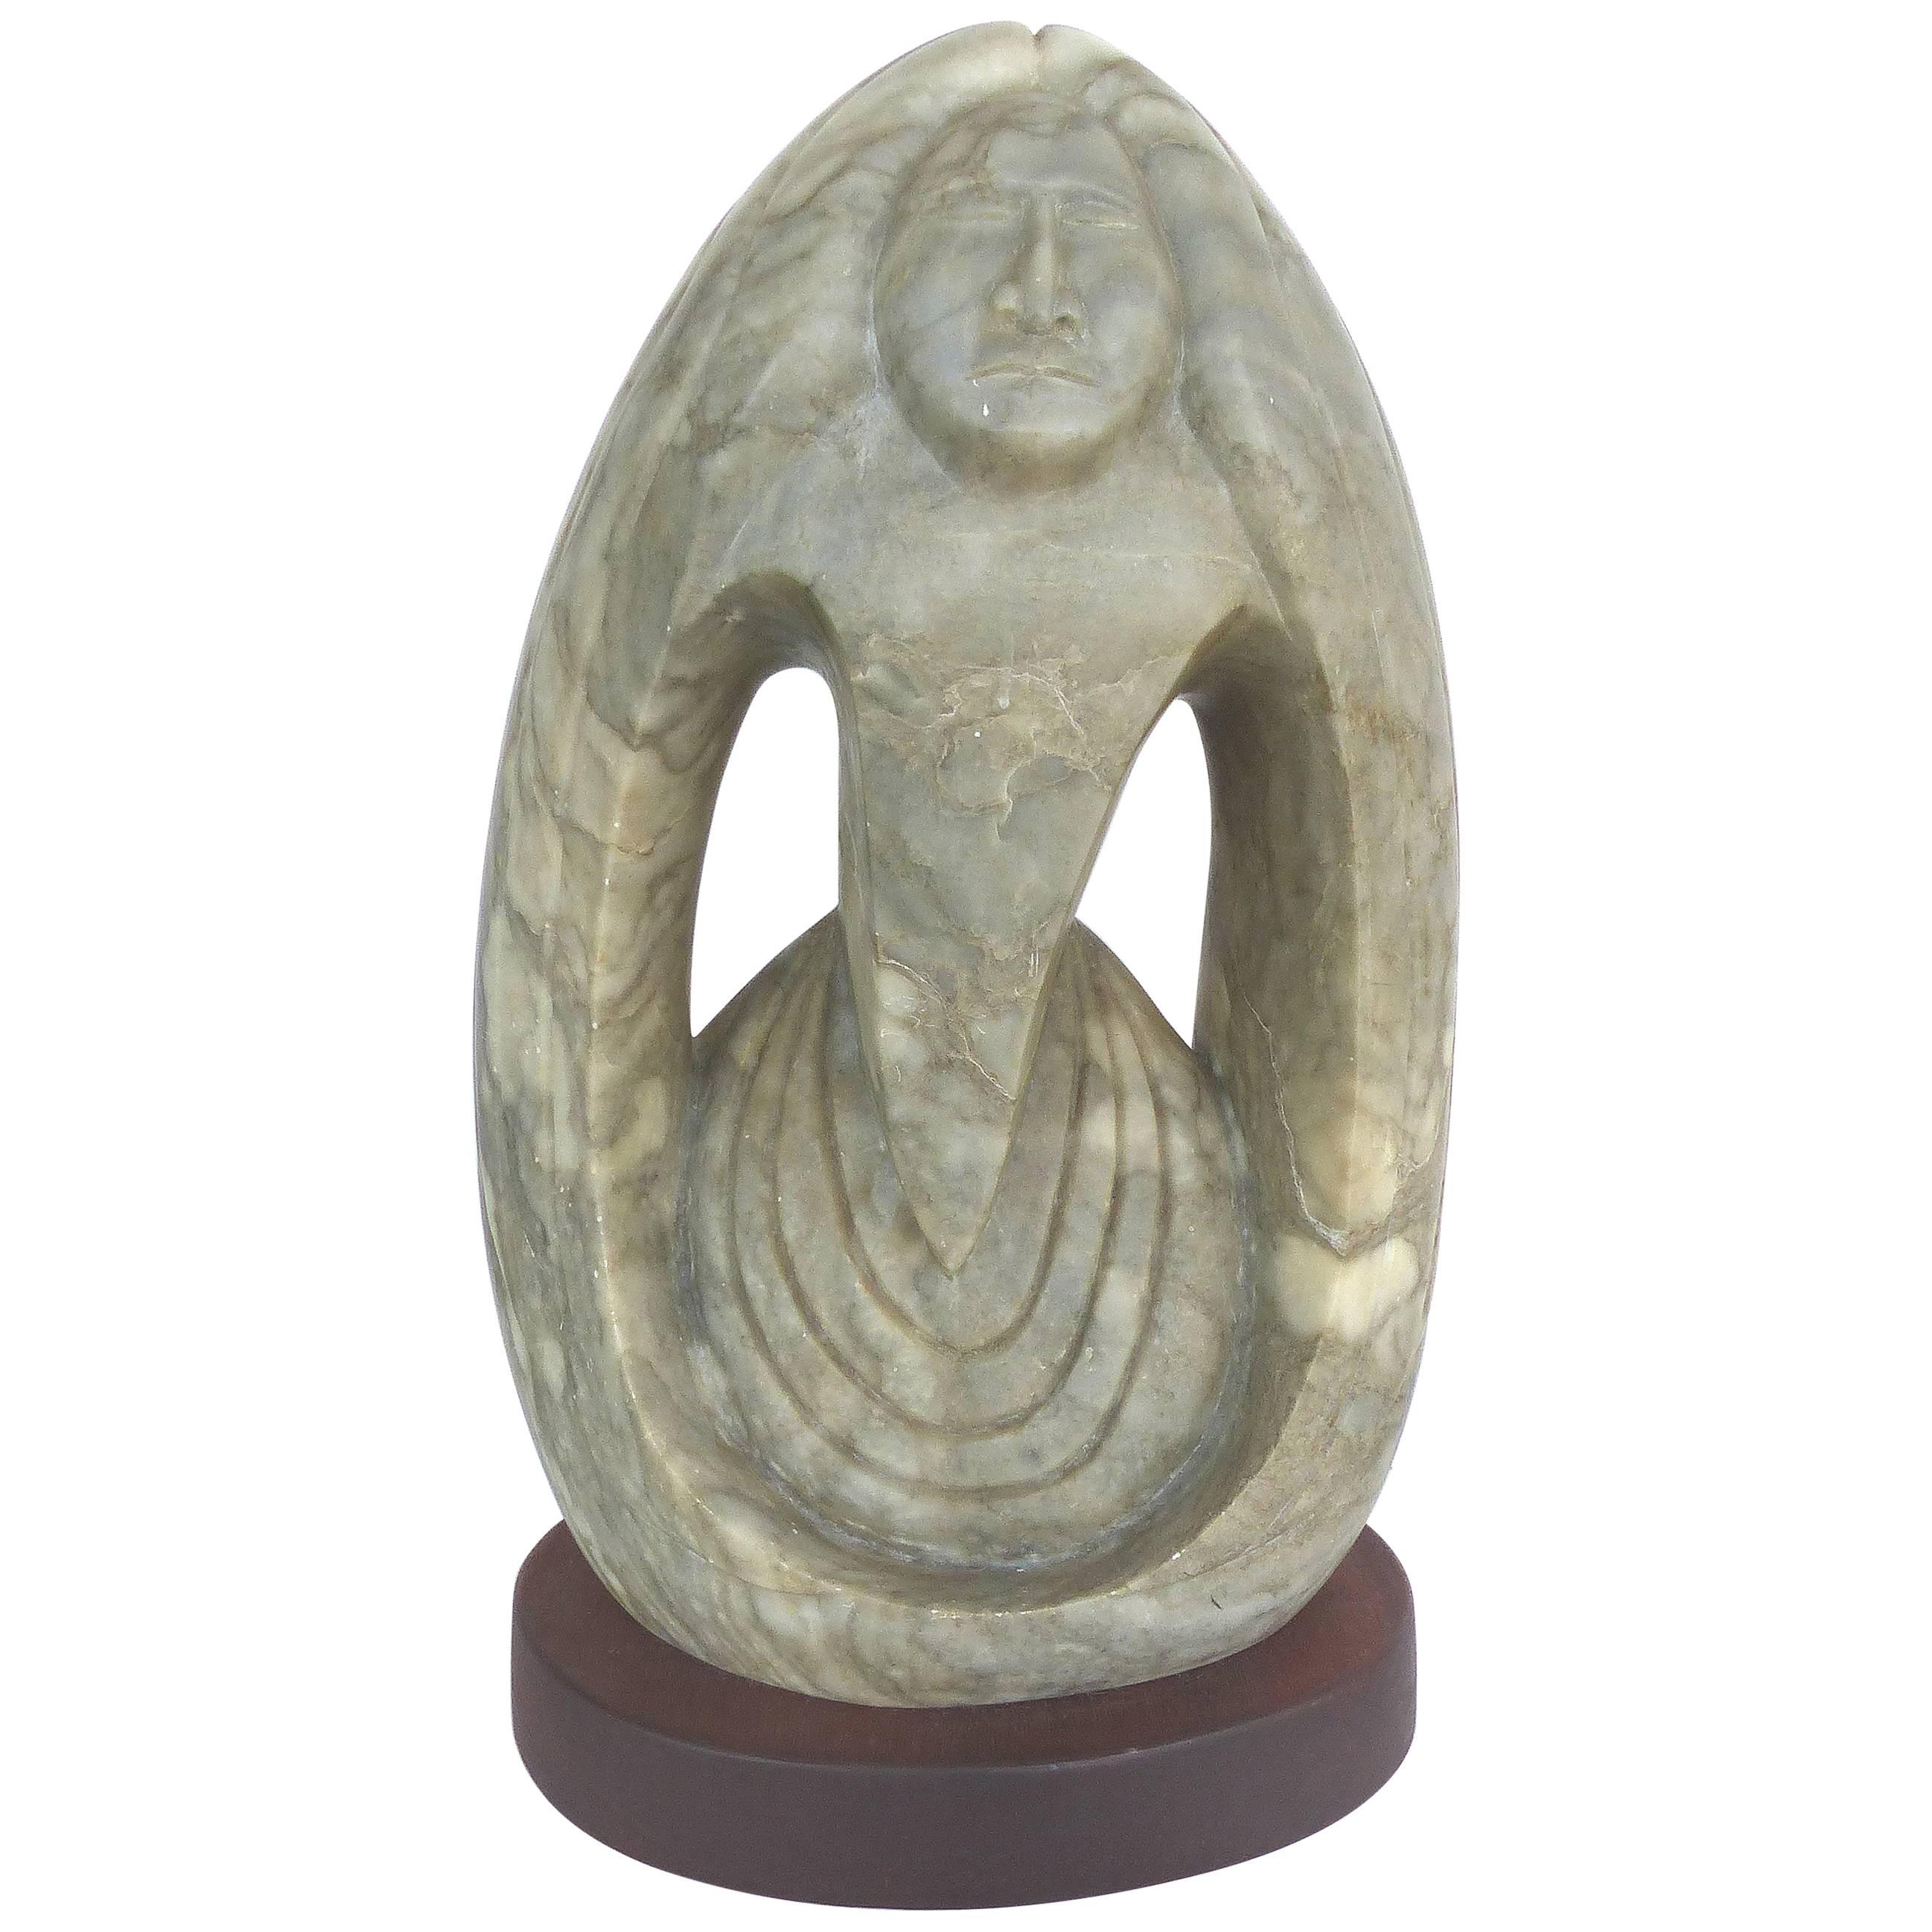 Carved Stone Sculpture of a Southwestern Figure of a Native Woman on Wood Base